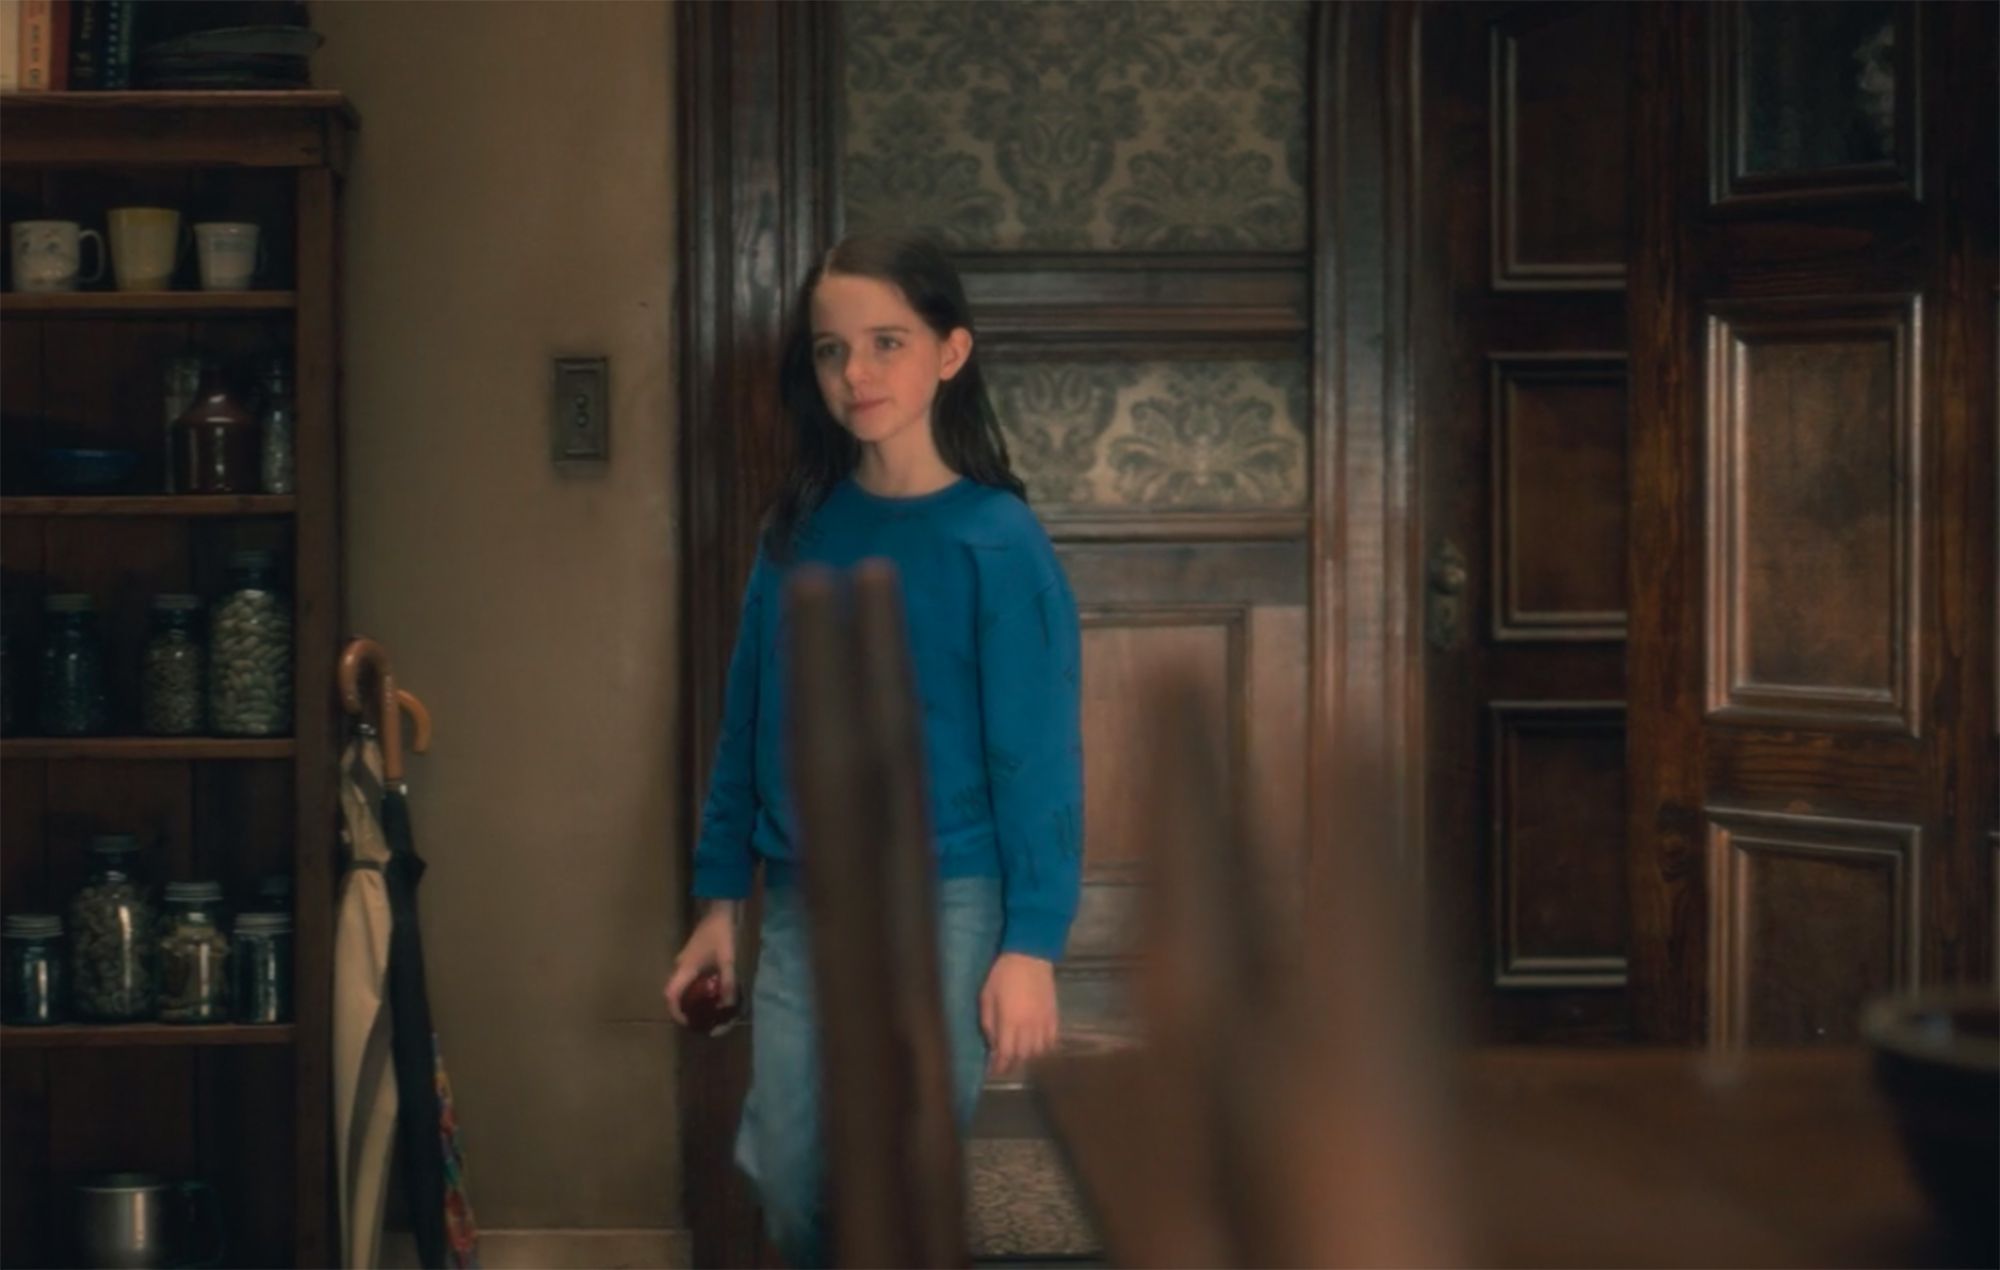 The Haunting of Hill House: 33 secret ghosts hiding in the shadows